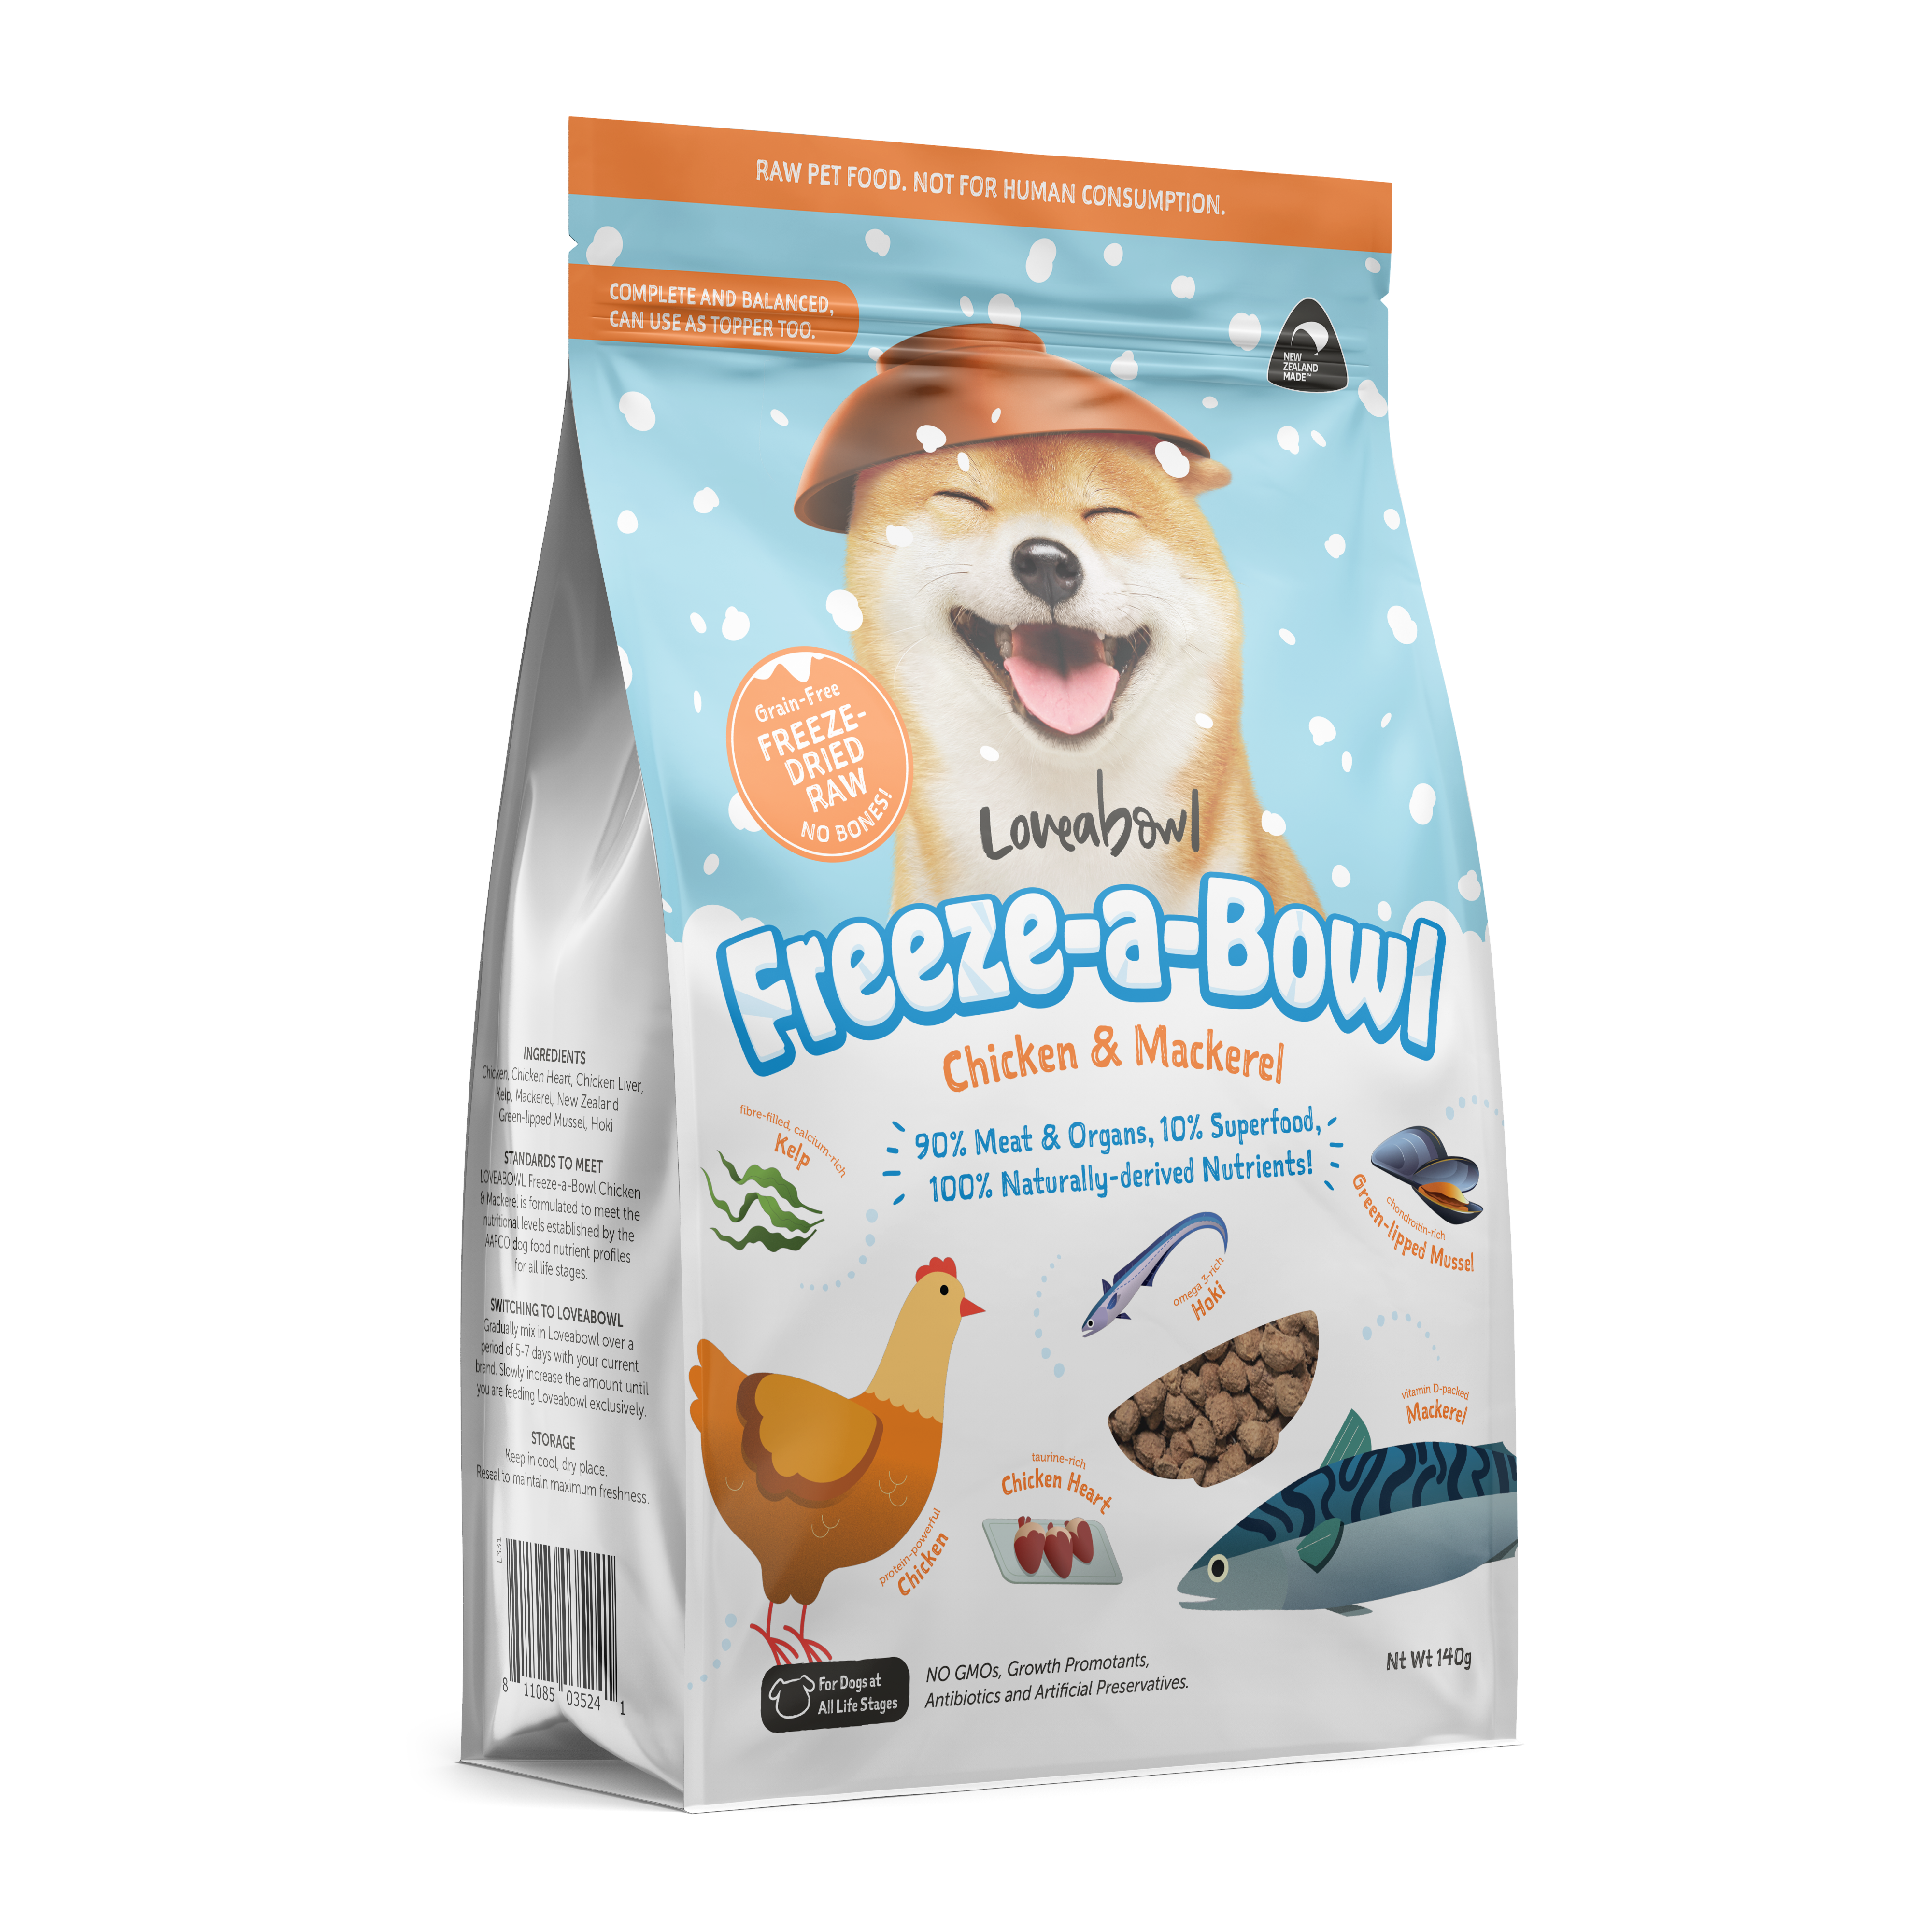 Loveabowl Freeze-a-Bowl Chicken & Mackerel for Dogs